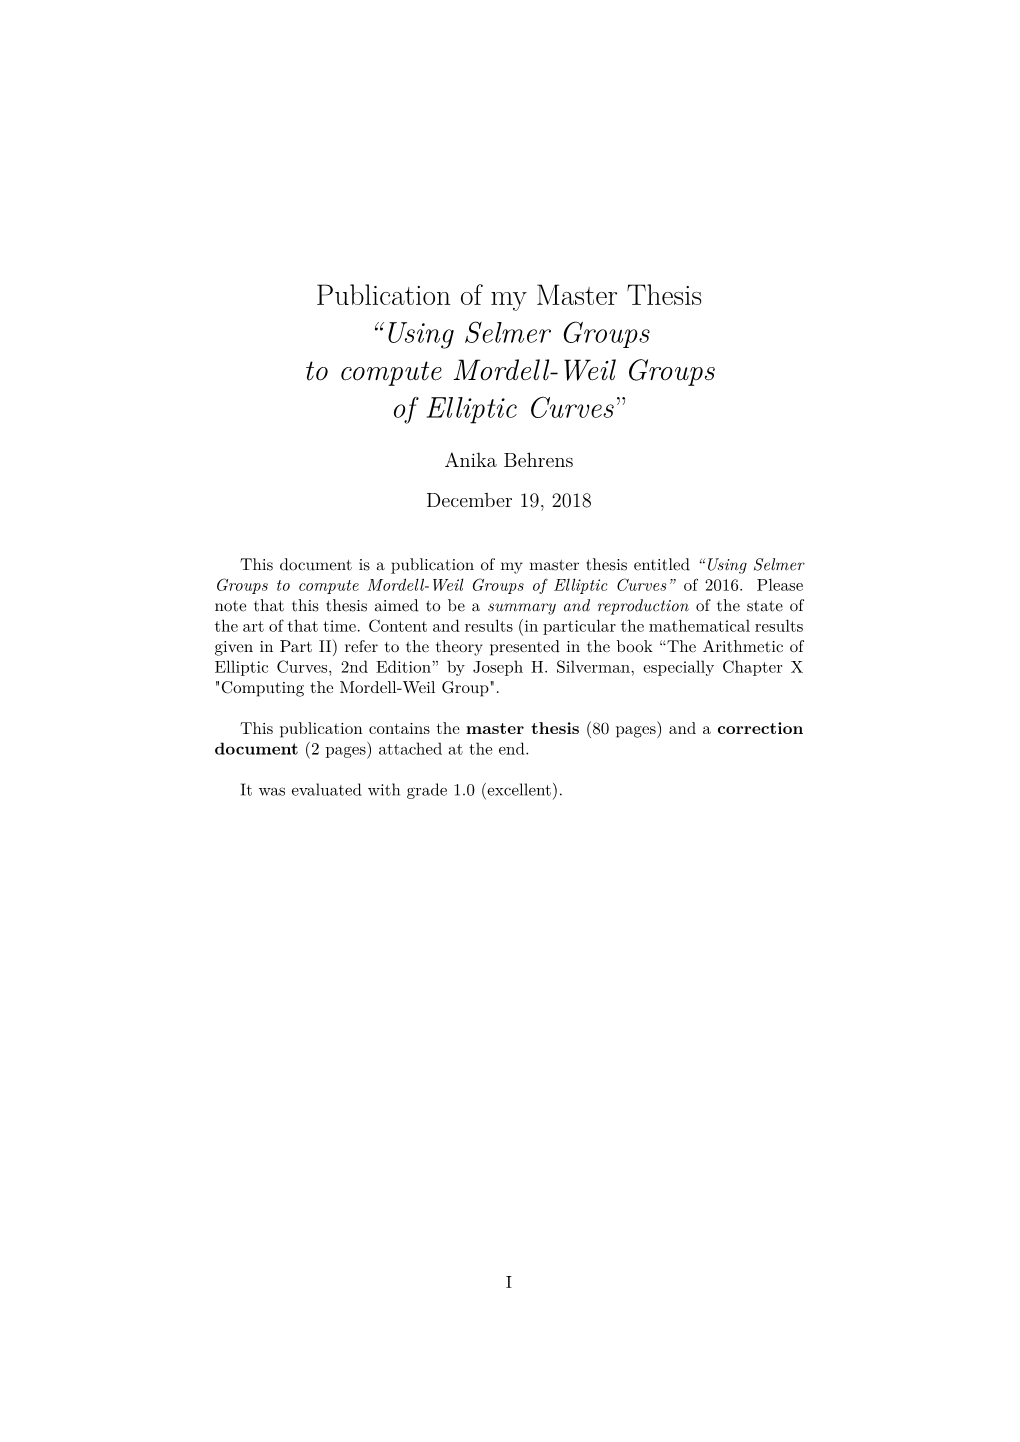 Publication of My Master Thesis “Using Selmer Groups to Compute Mordell-Weil Groups of Elliptic Curves”